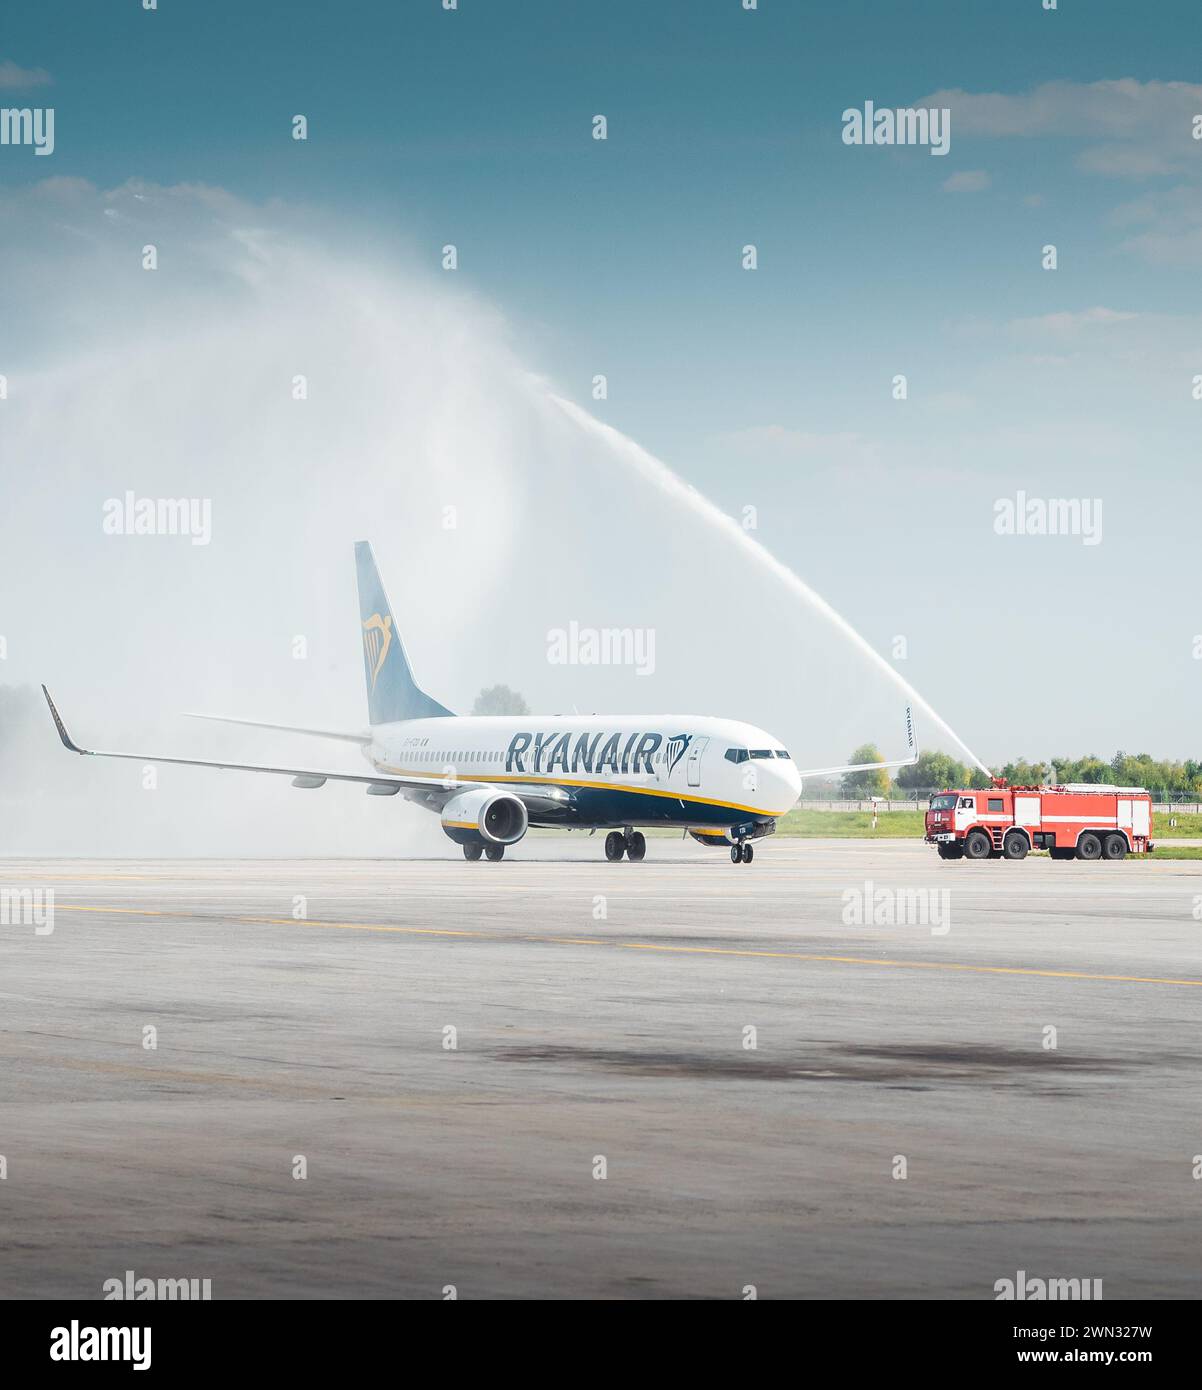 Water salute for the commencement of RyanAir service at Boryspil International Airport. Airplane Boeing 737 (EI-FZD) passing under water arch Stock Photo